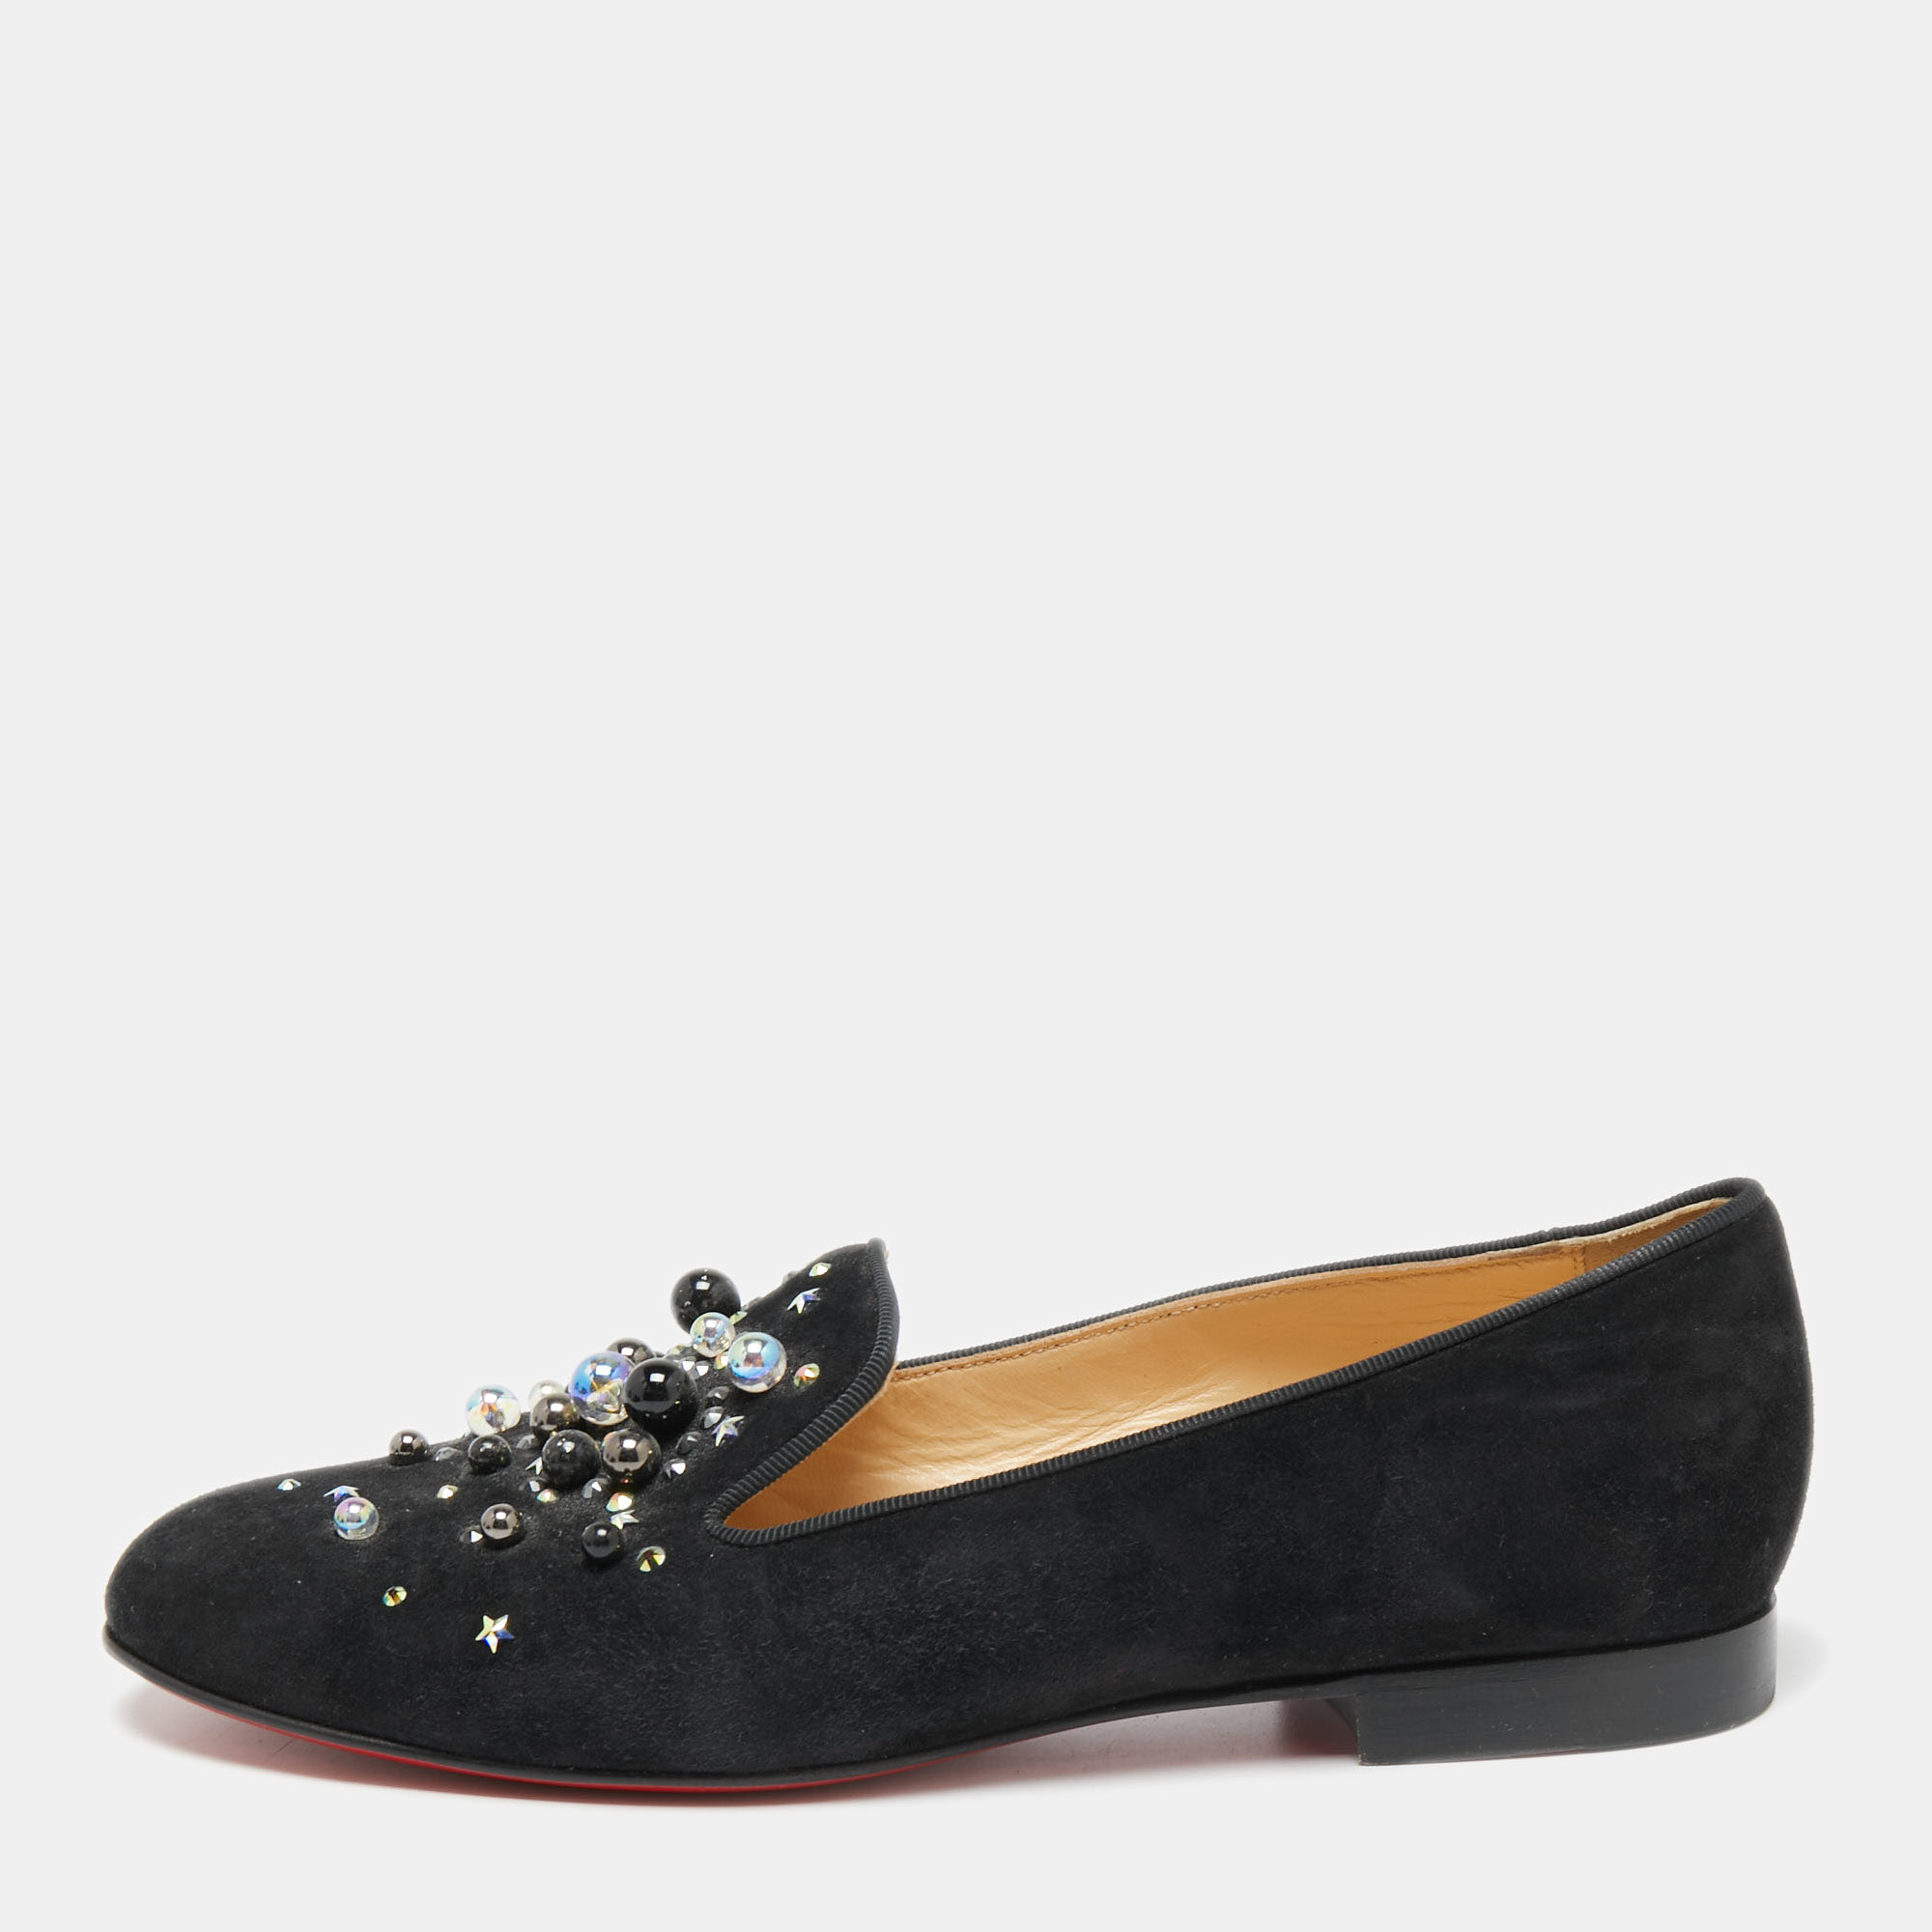 Christian Louboutin Black Suede Candy Studded Smoking Slippers Size 36